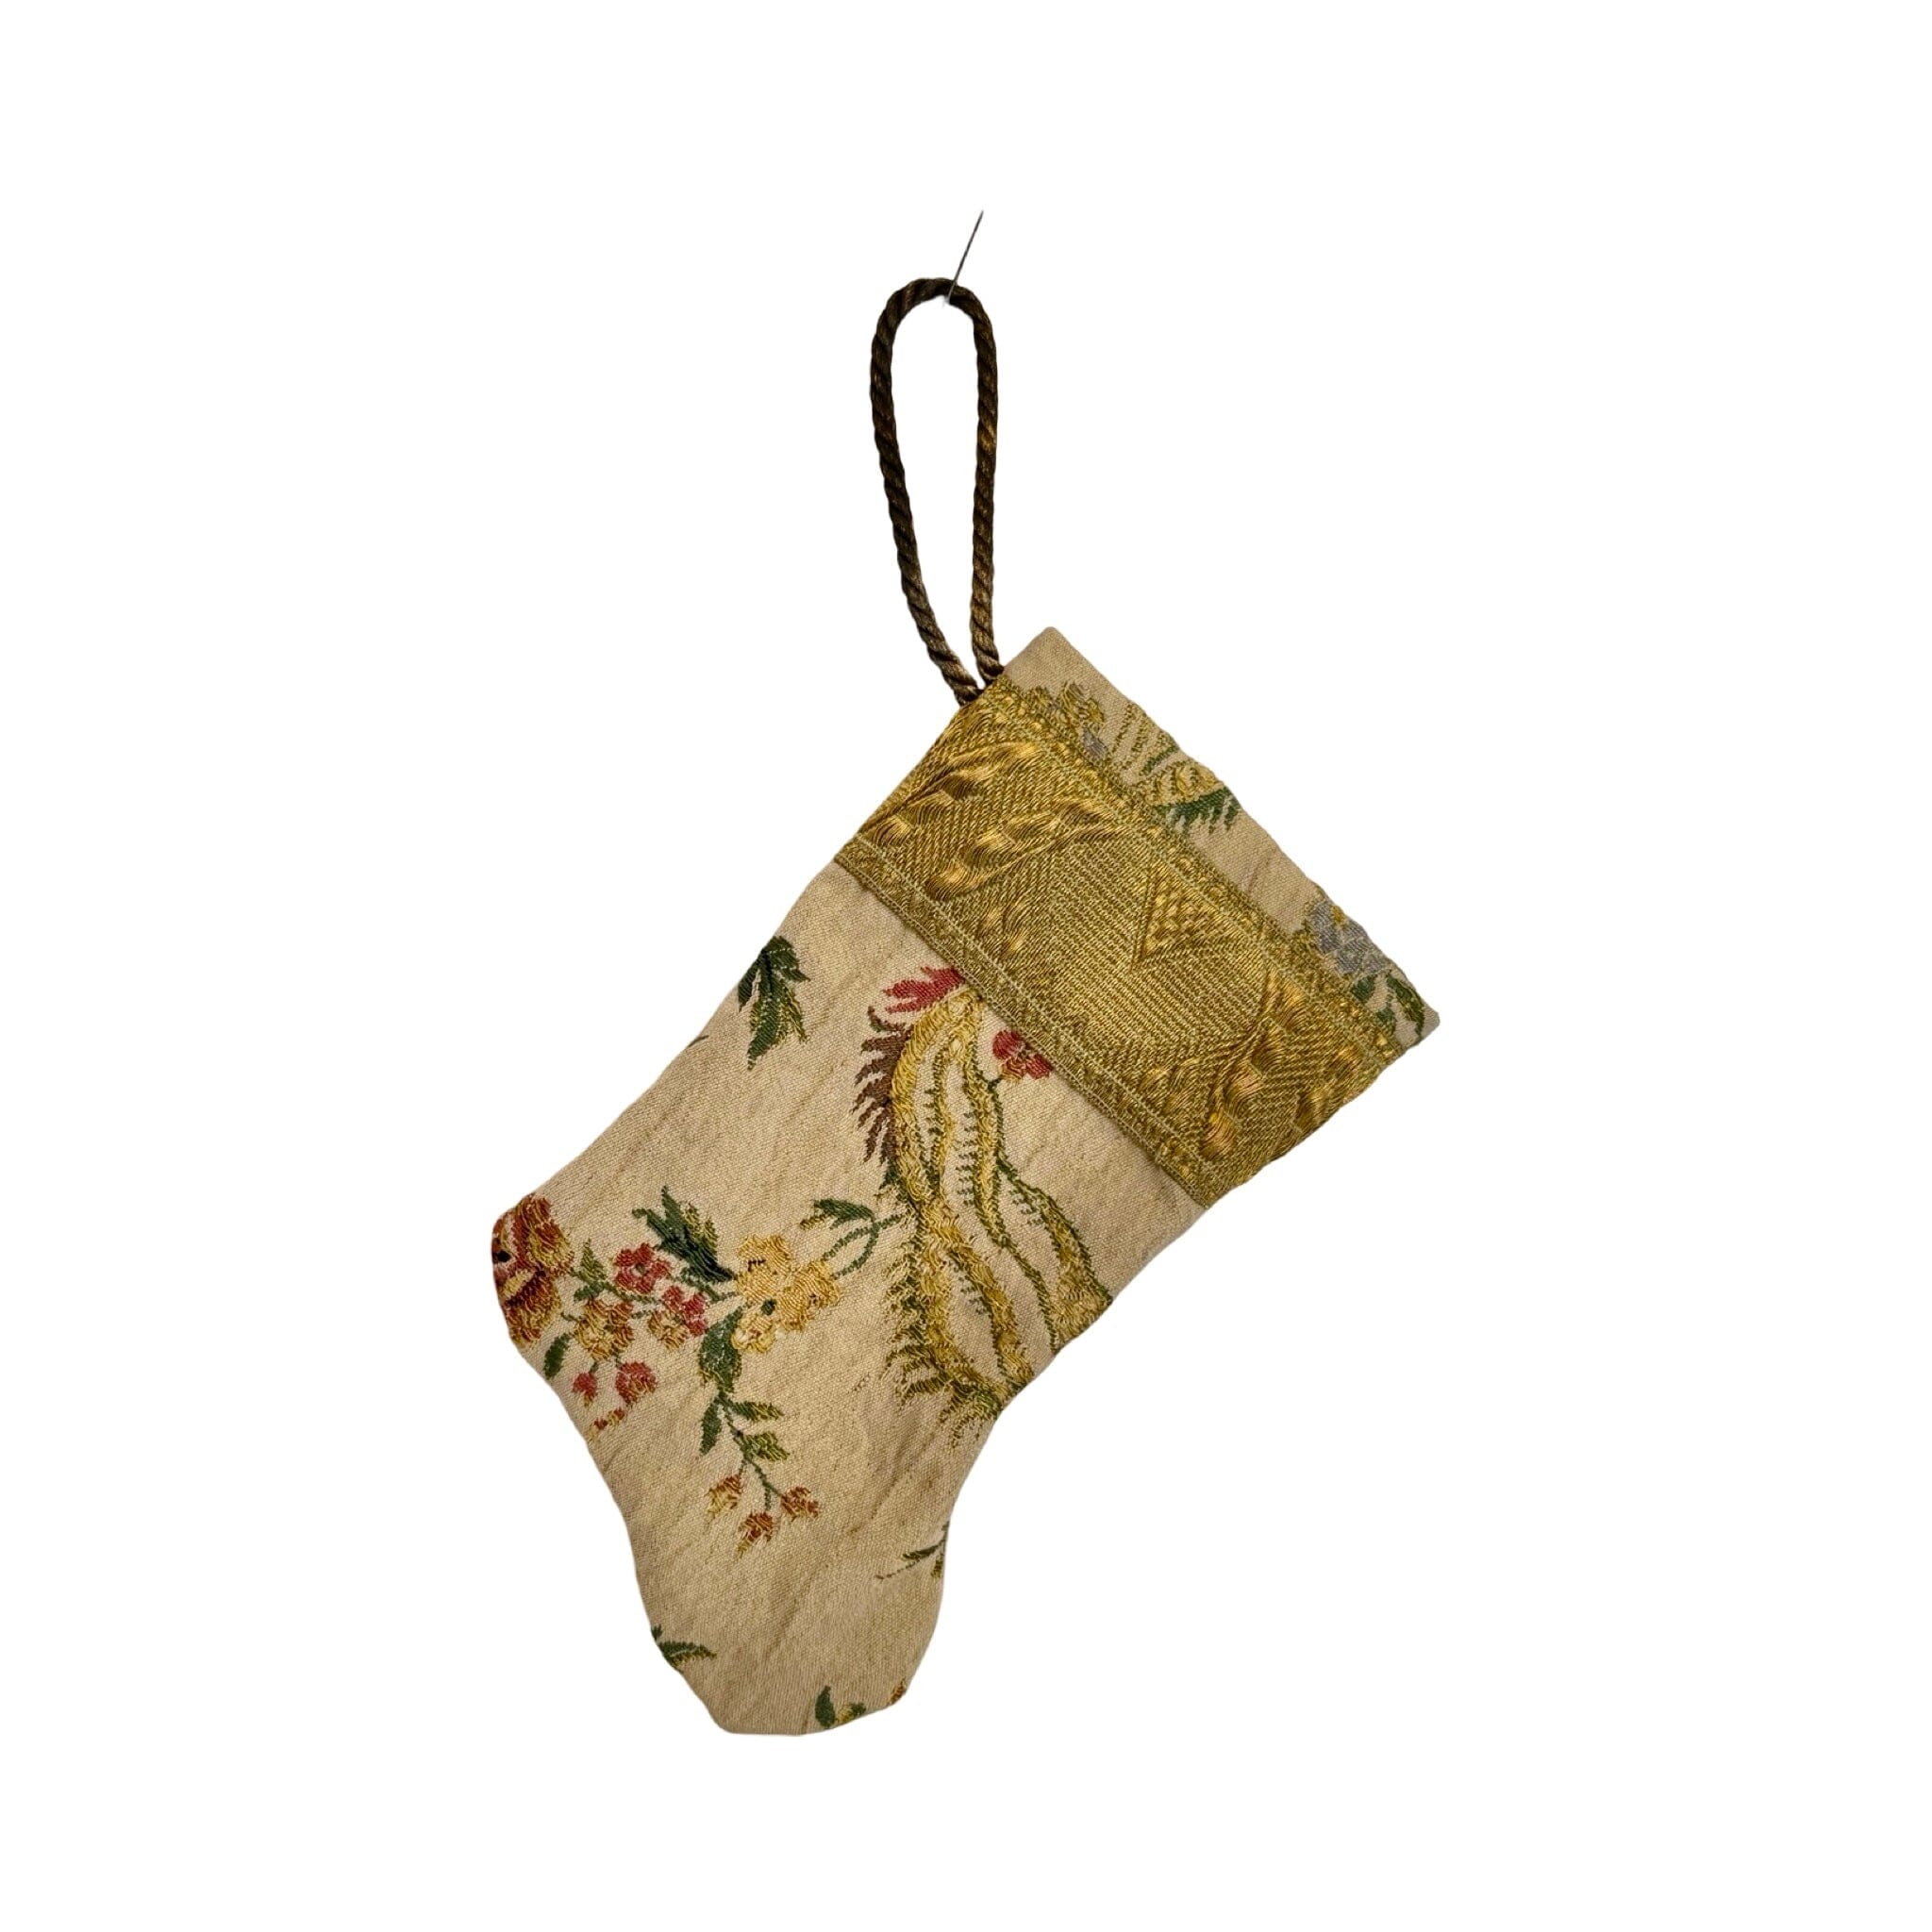 Handmade Mini Stocking Made From Vintage Fabric and Trims- Antique Sand Floral Ornament B. Viz Design D 